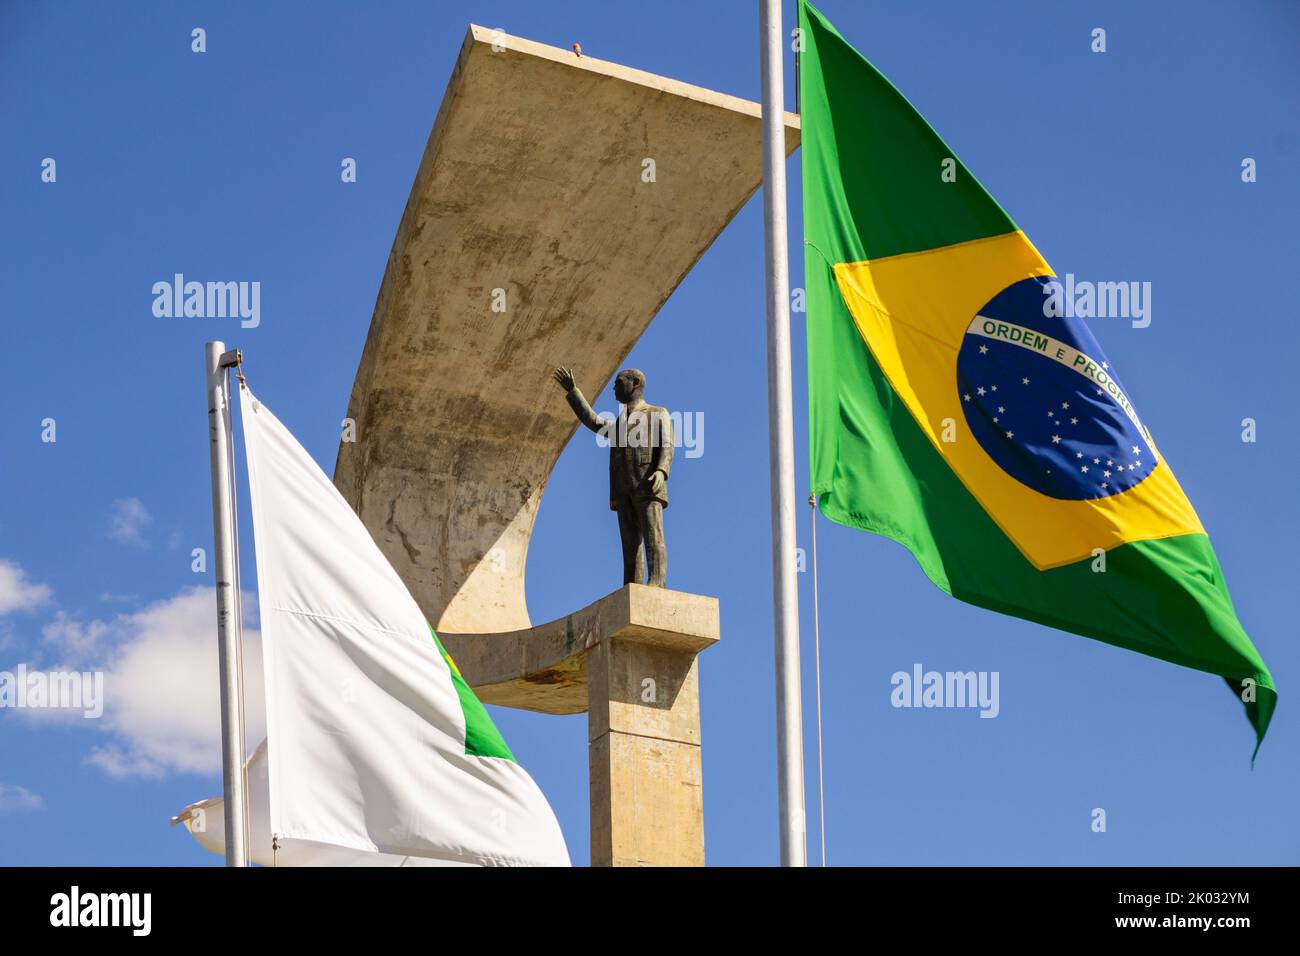 Brasília, Federal District, Brazil – July 23, 2022: Detail of the monument and flags in front of the JK Memorial, project by Oscar Niemeyer. Stock Photo